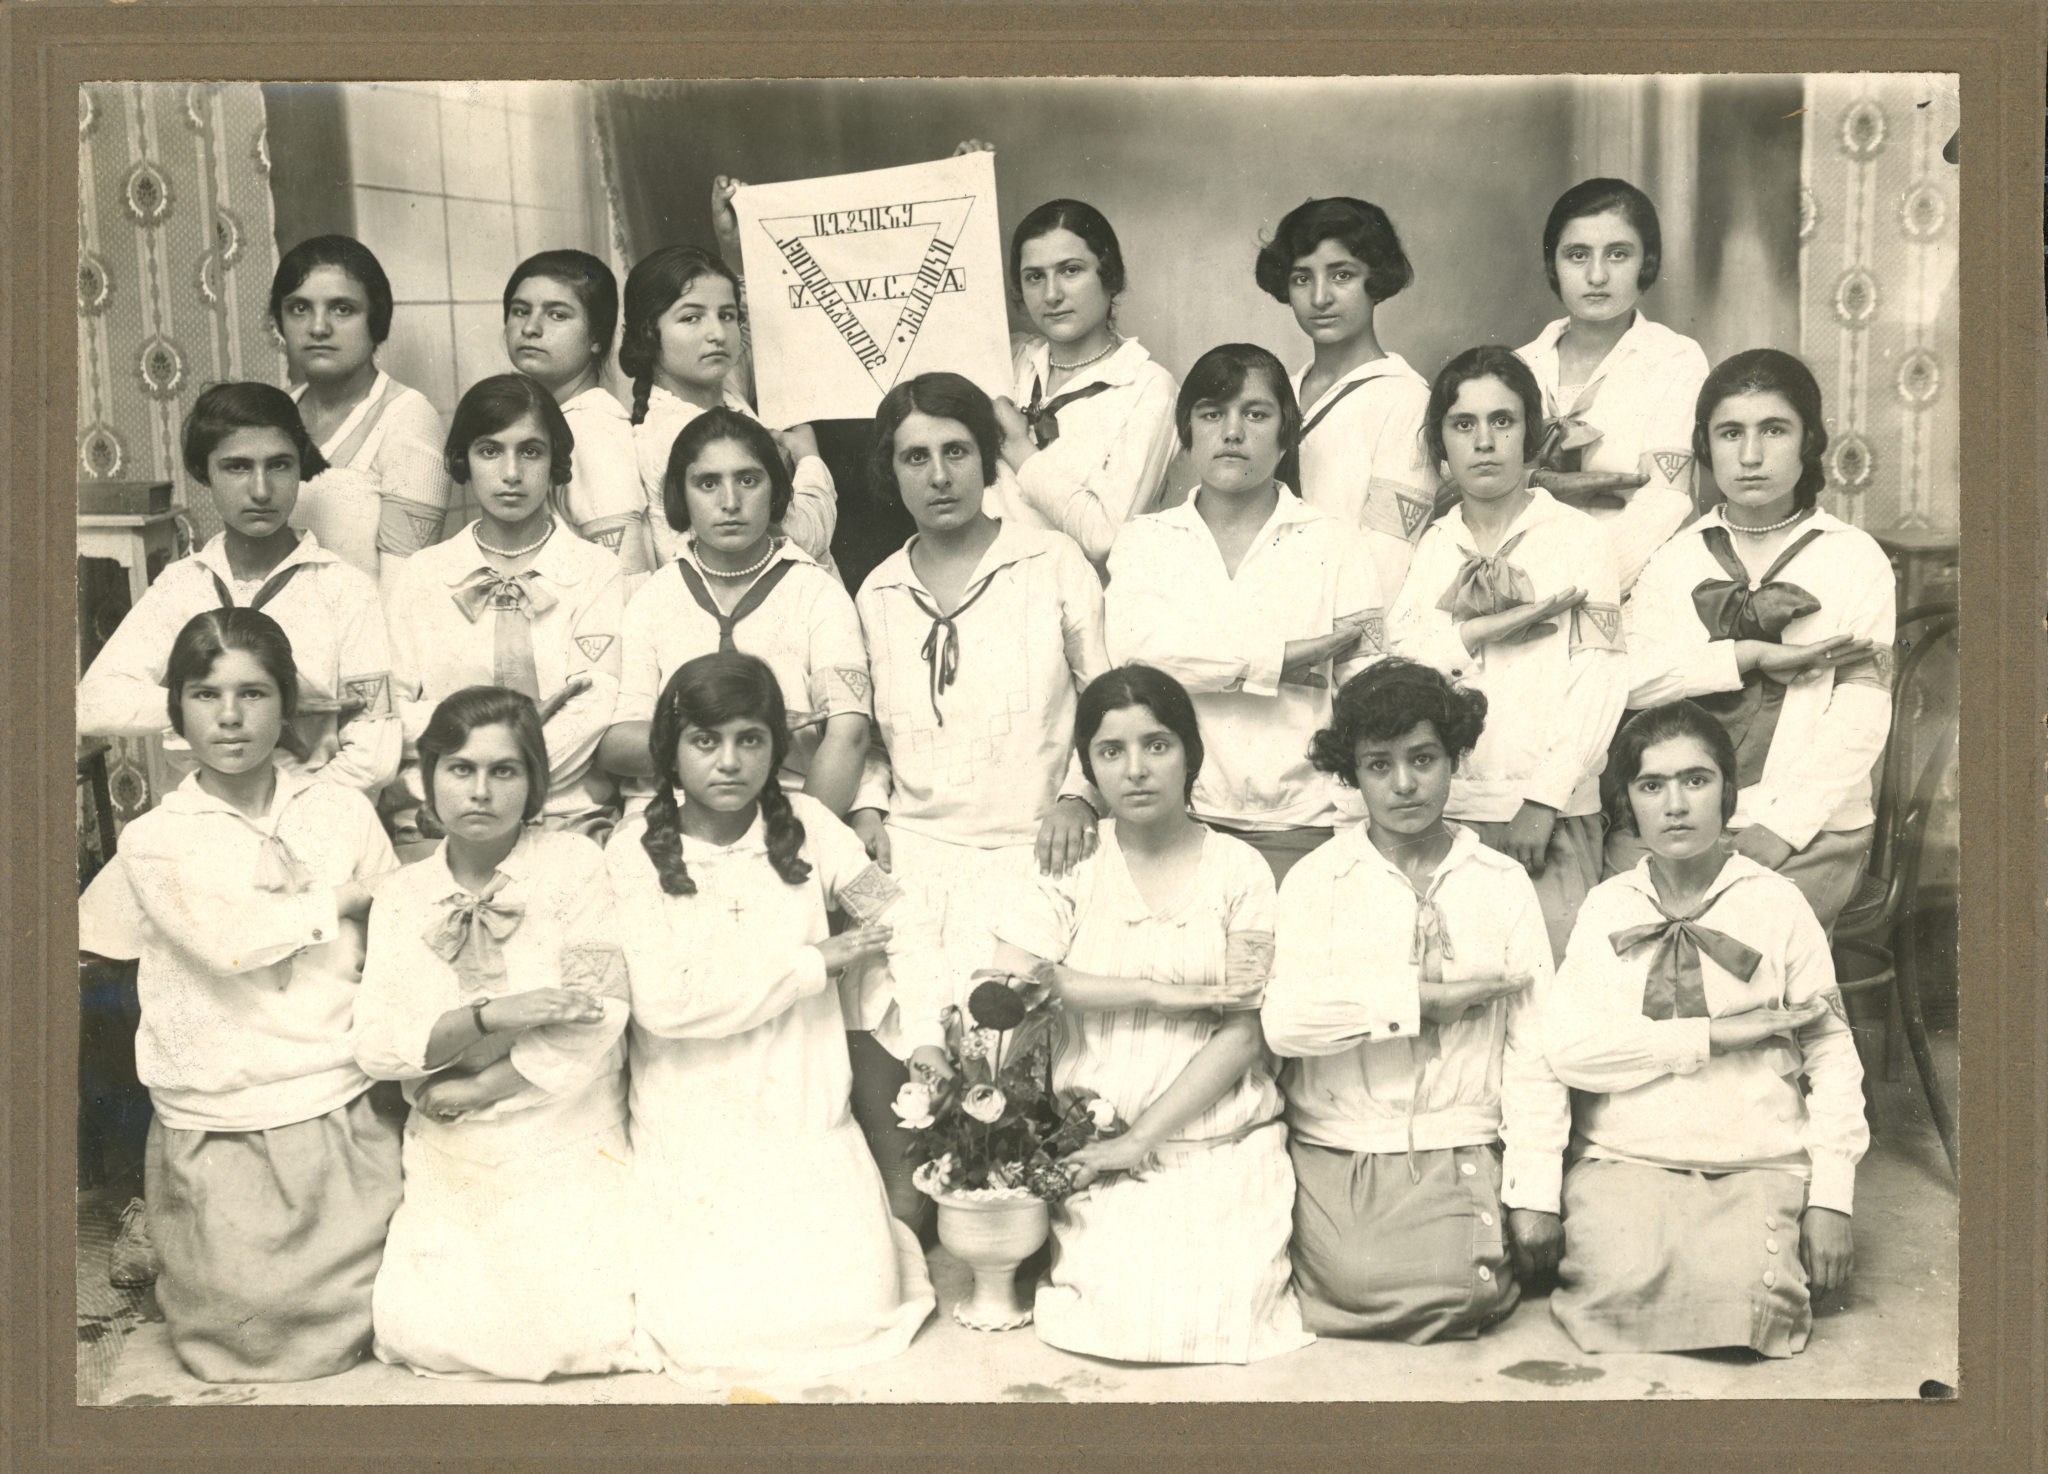 Archival photo of Armenian YWCA group in Beirut in 1927